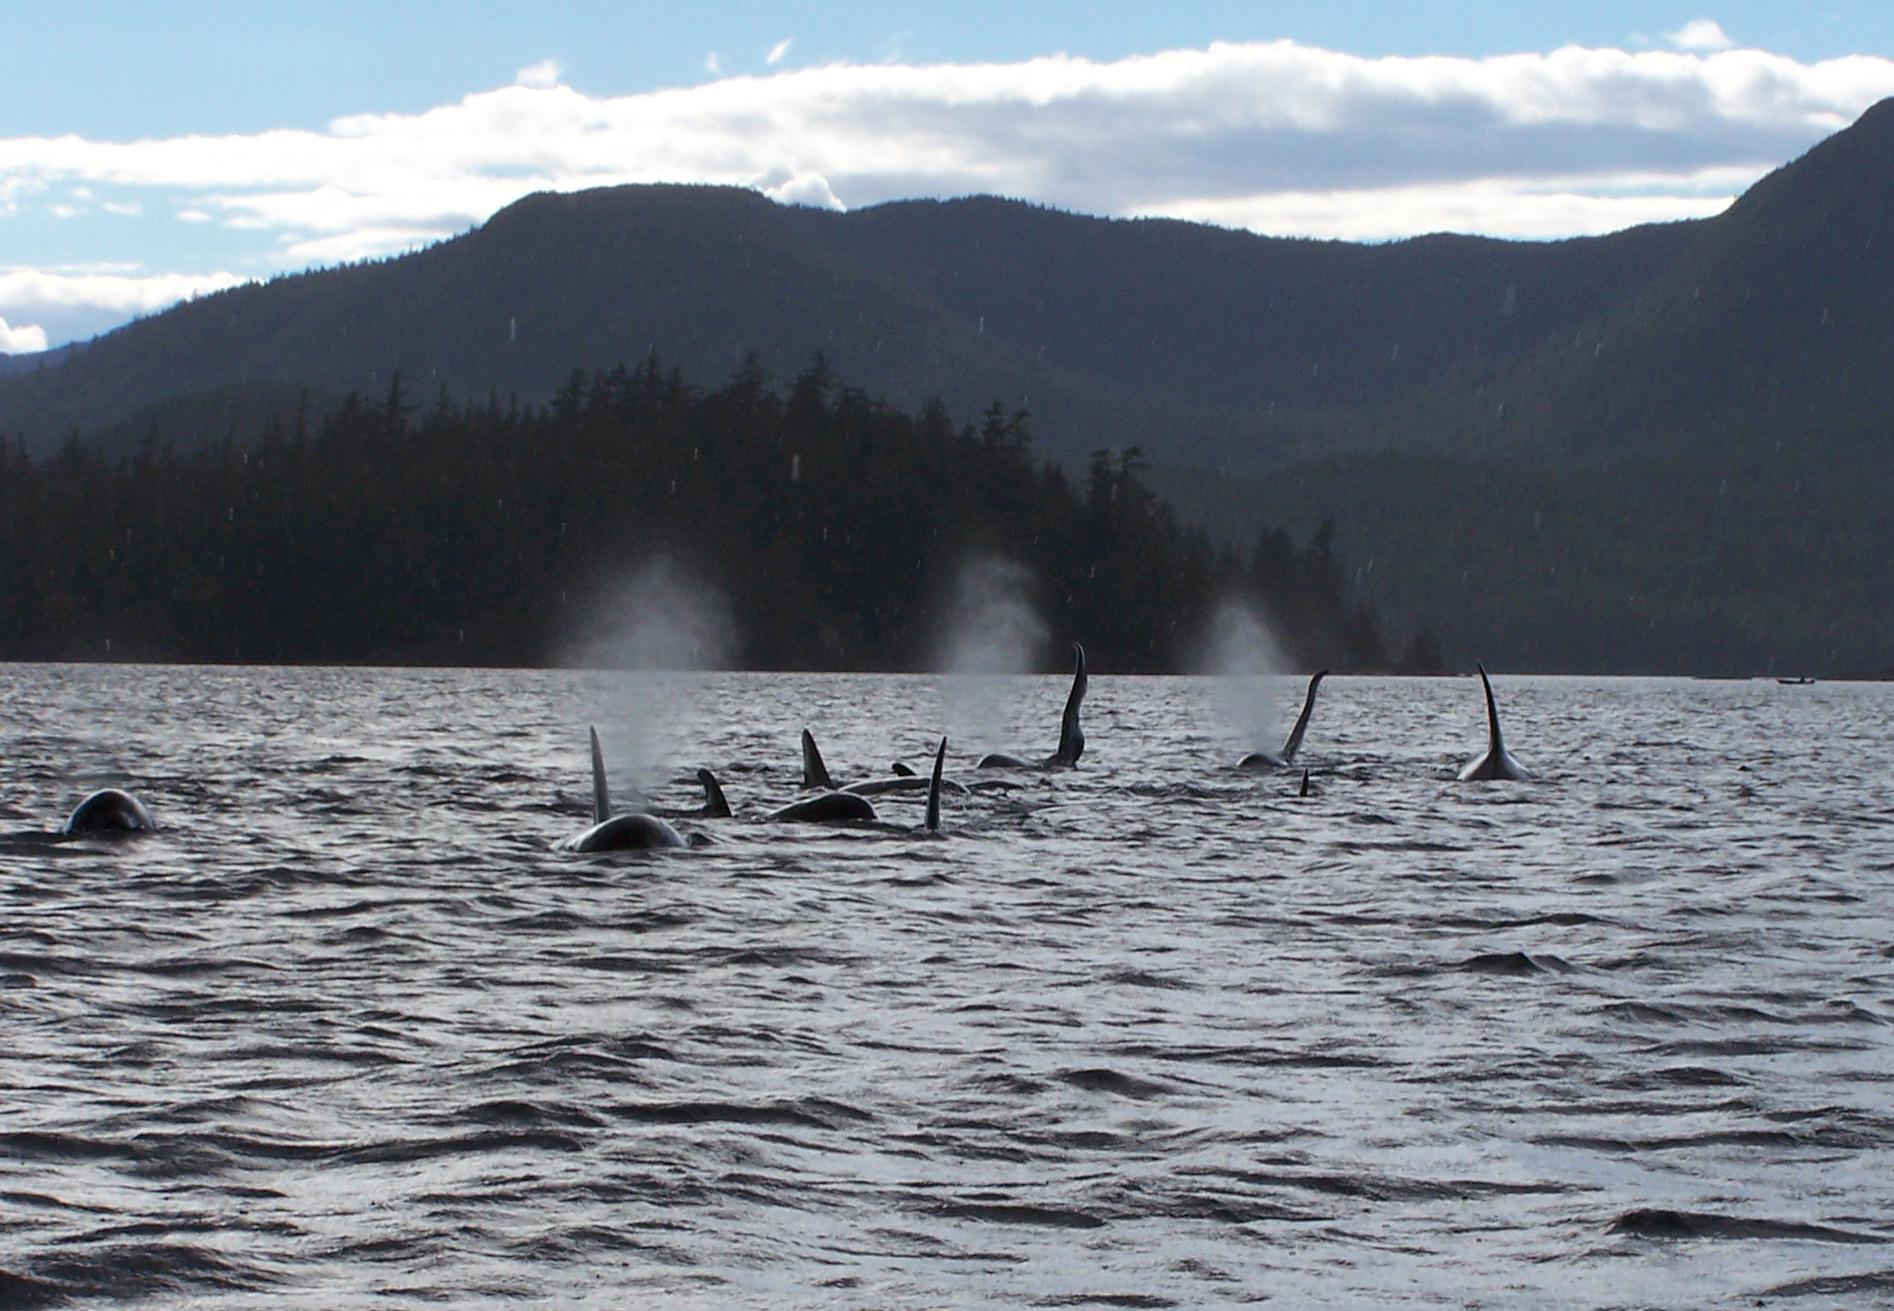  In September 2004, there was a meeting of several of the Northern Resident pods at Orcas Cove. It was an amazing day on the water with more than 30 orcas sighted.    